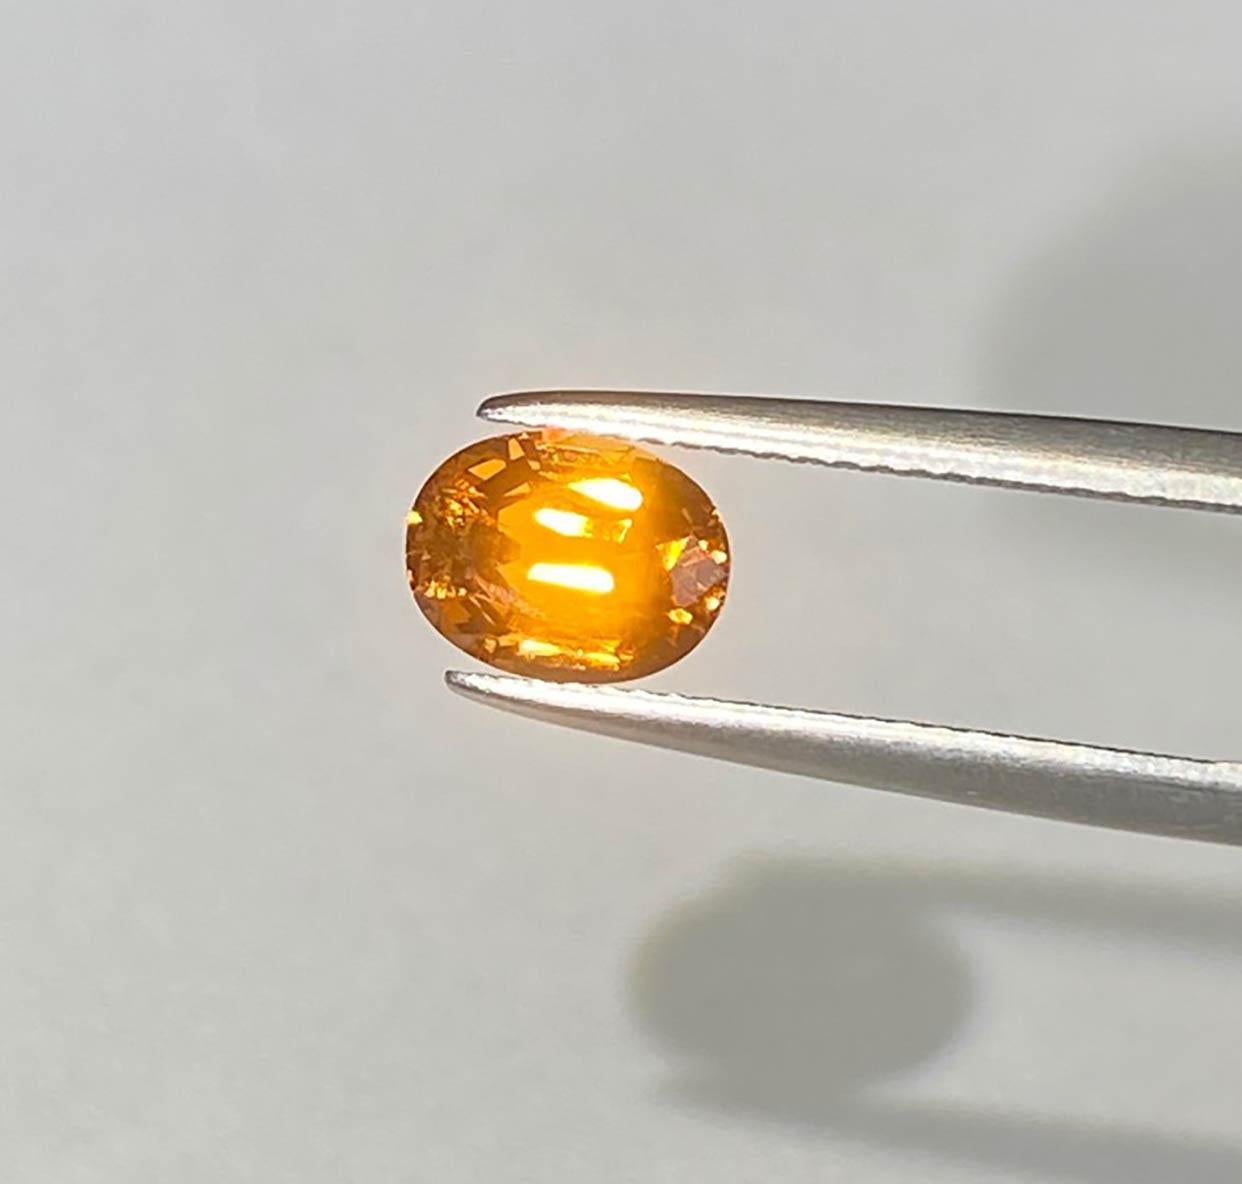 This Natural Mandarine Garnet Oval is 1.8 Carats and a lovely Mandarine Orange color. 

Originally from San Diego, California, Kary Adam lived in the “Gem Capital of the World” - Bangkok, Thailand, sourcing local gem stones and working with local